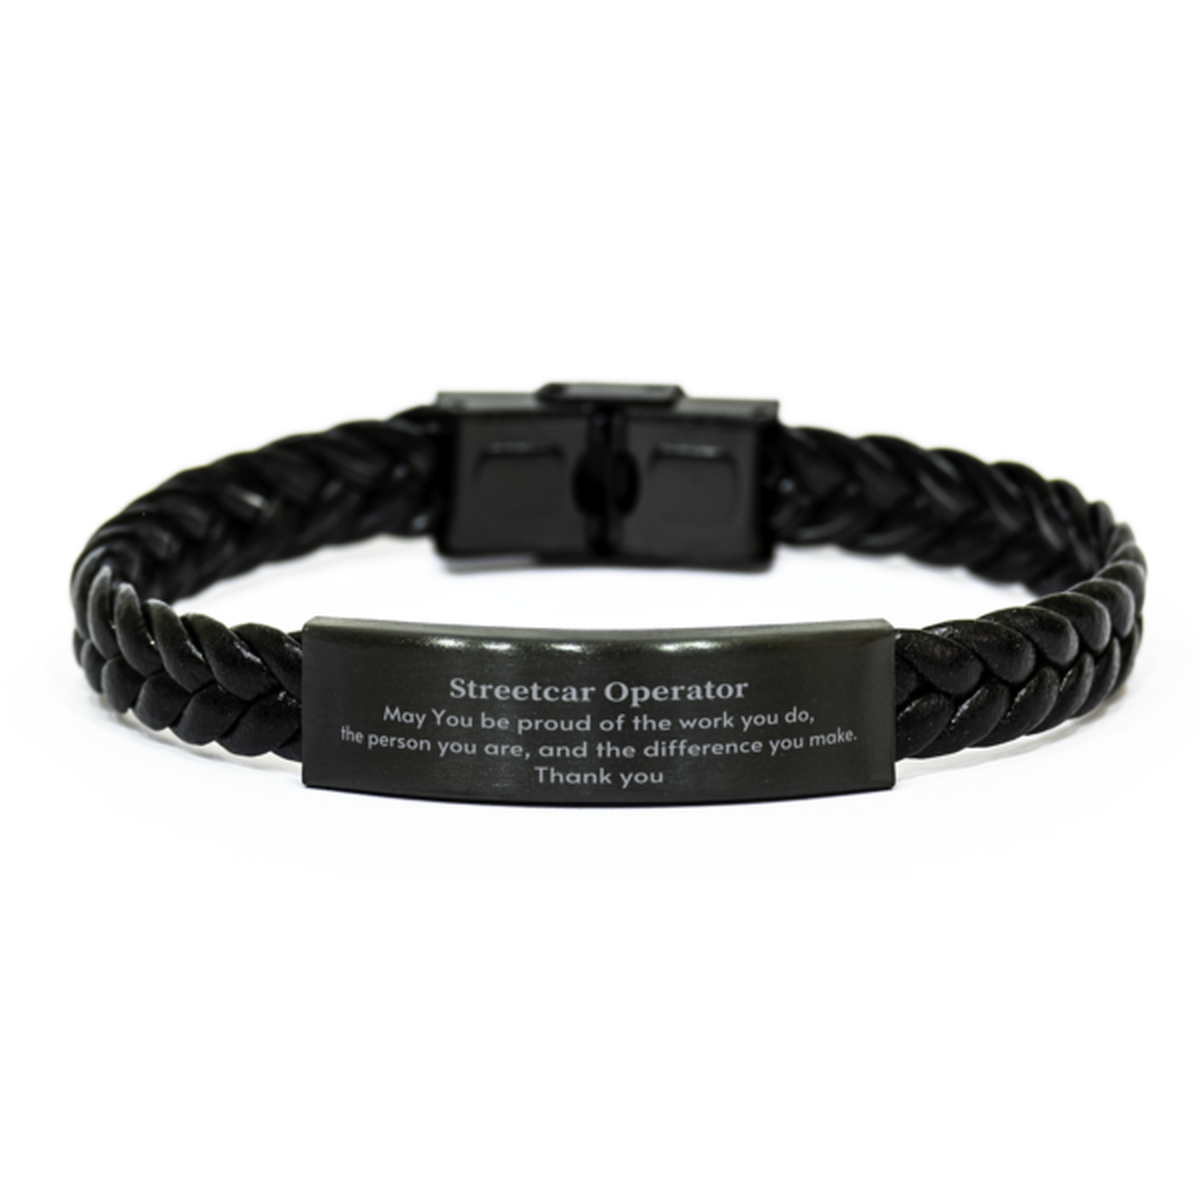 Heartwarming Braided Leather Bracelet Retirement Coworkers Gifts for Streetcar Operator, Streetcar Operator May You be proud of the work you do, the person you are Gifts for Boss Men Women Friends